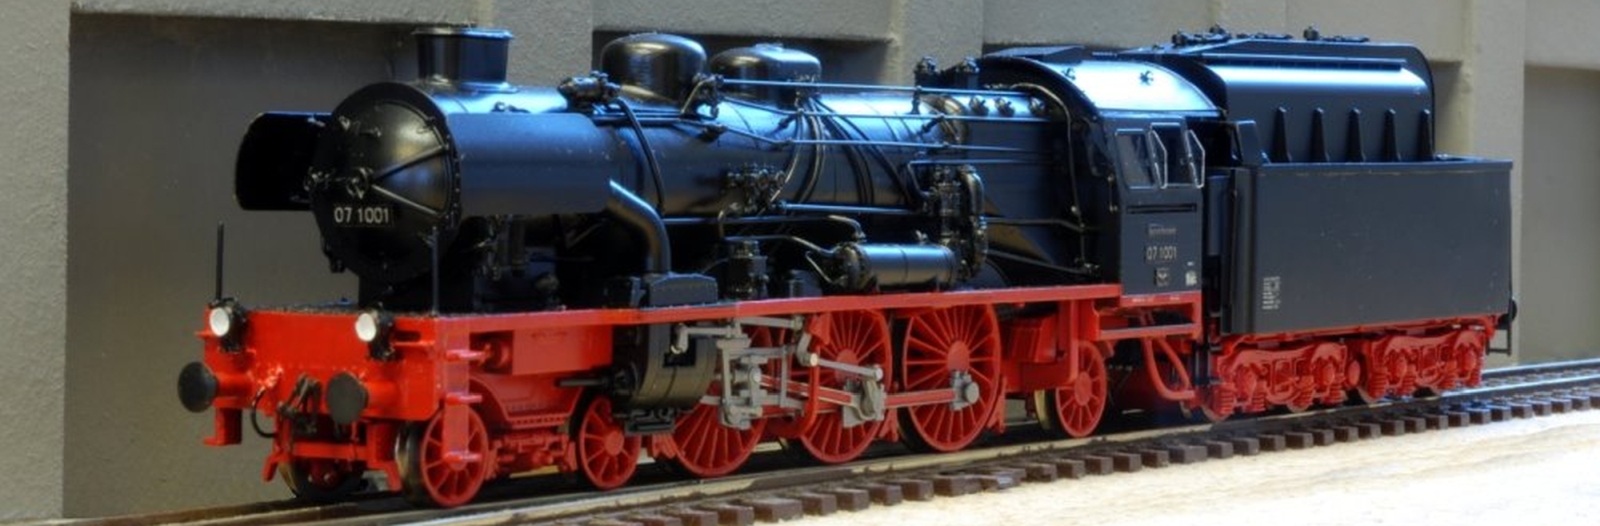 Model of the 07 1001, handcrafted by Michael Menzendorff